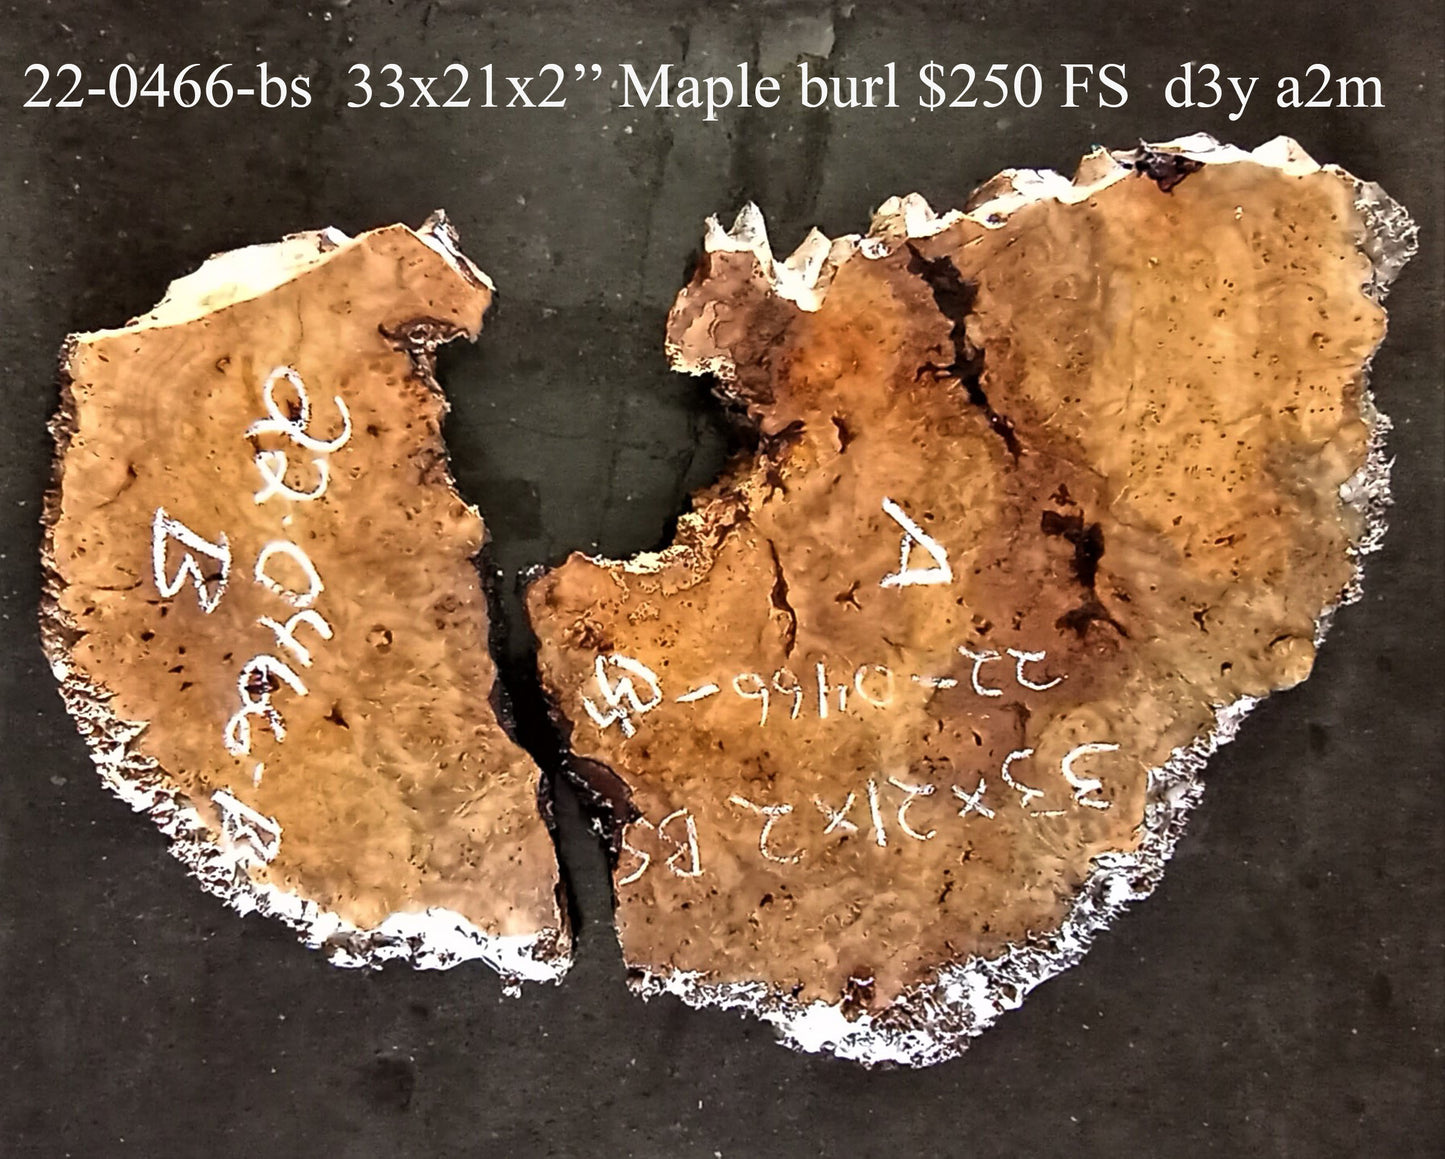 Maple burl | river table | serving trays | DIY crafts | 22-0466